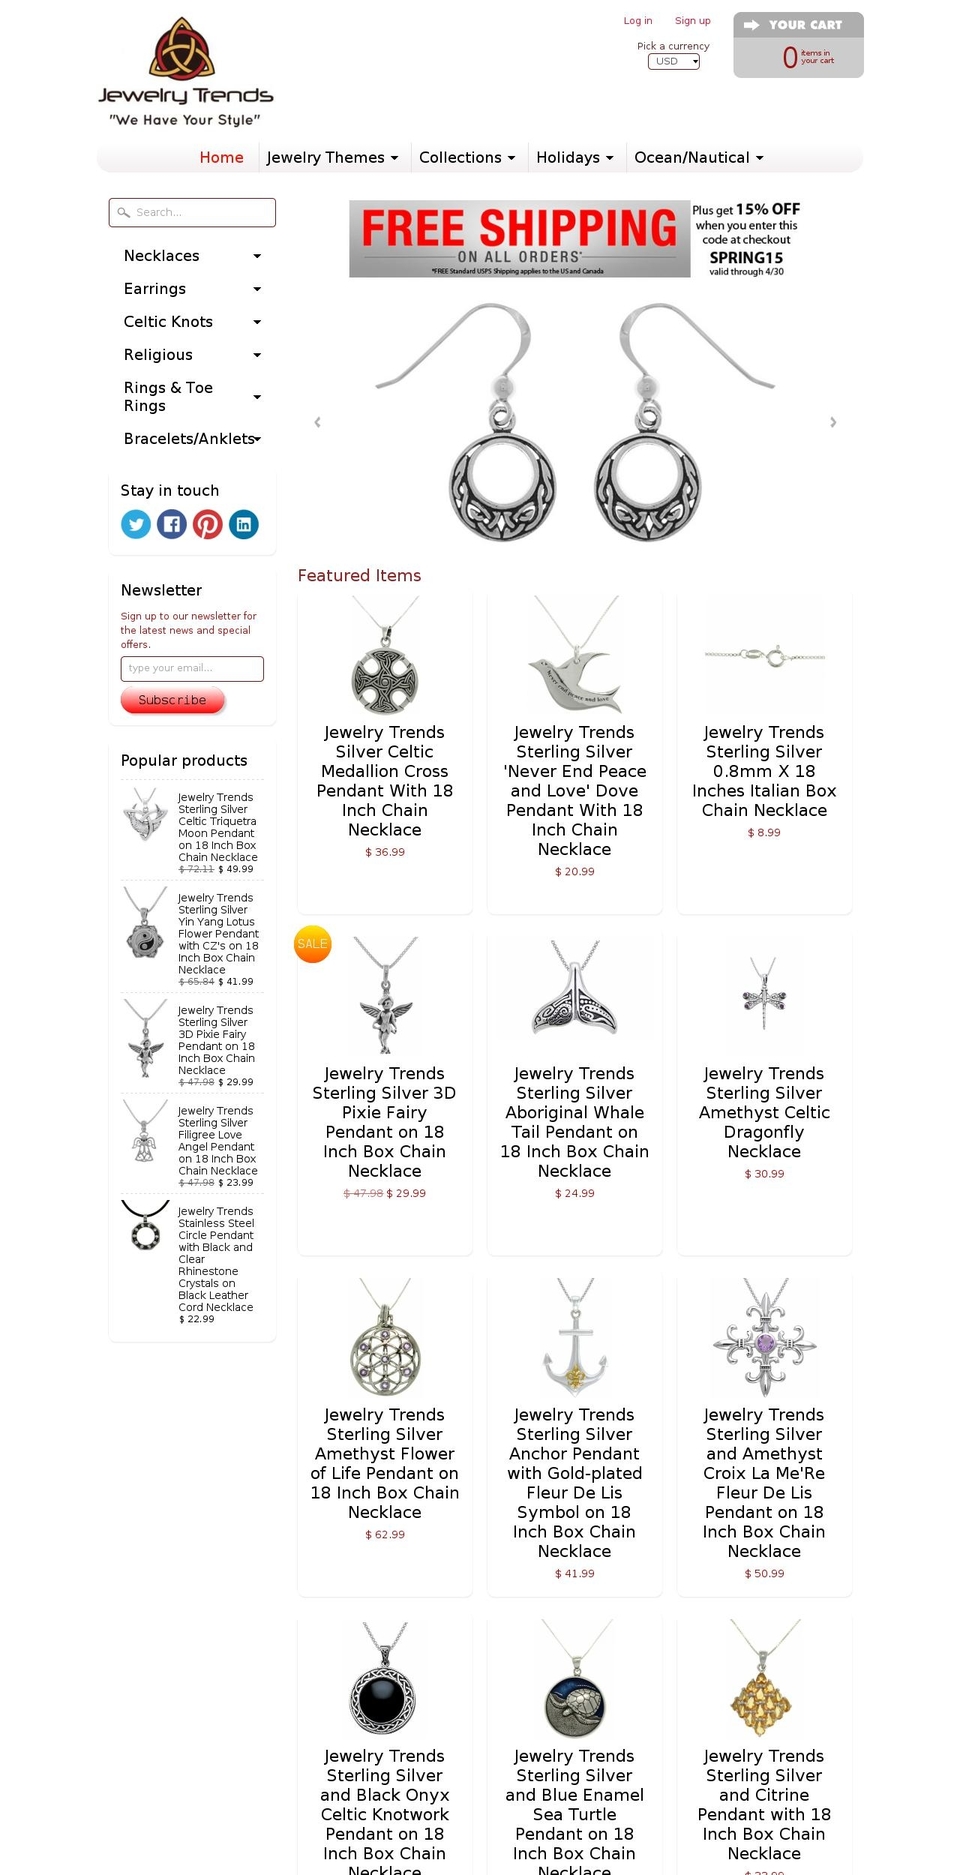 Sunrise Shopify theme site example jewelrytrends.com